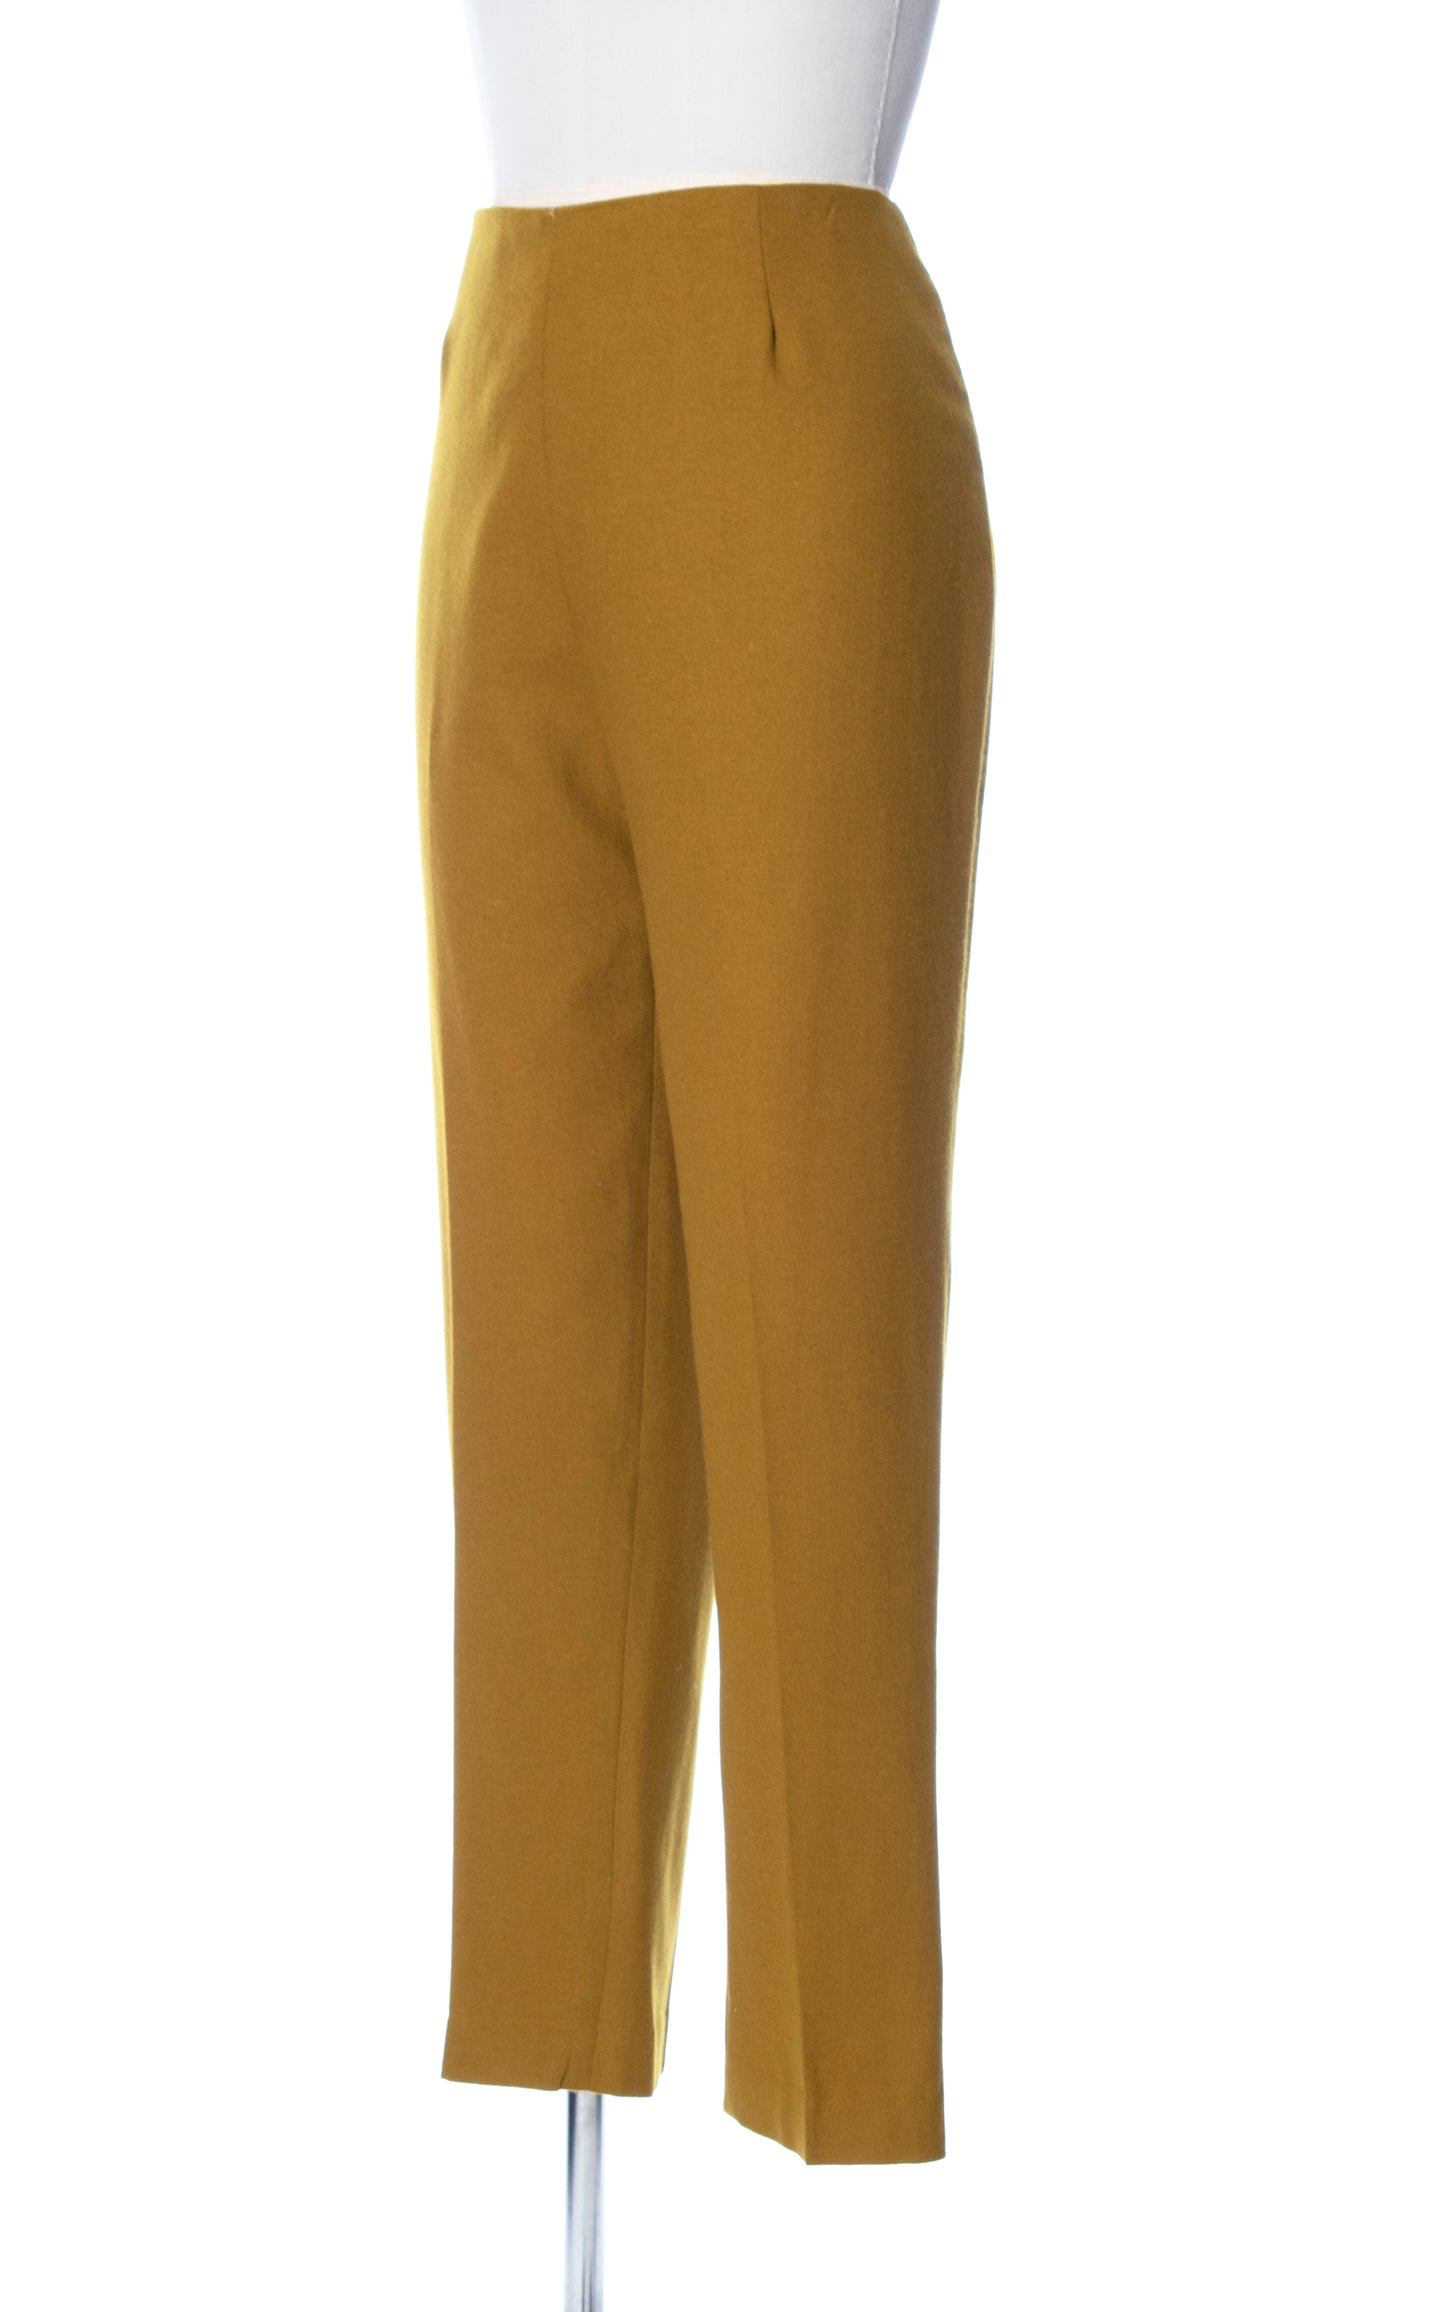 Vintage 60s 1960s Mustard Yellow Wool Twill High Waisted Pants Birthday Life Vintage